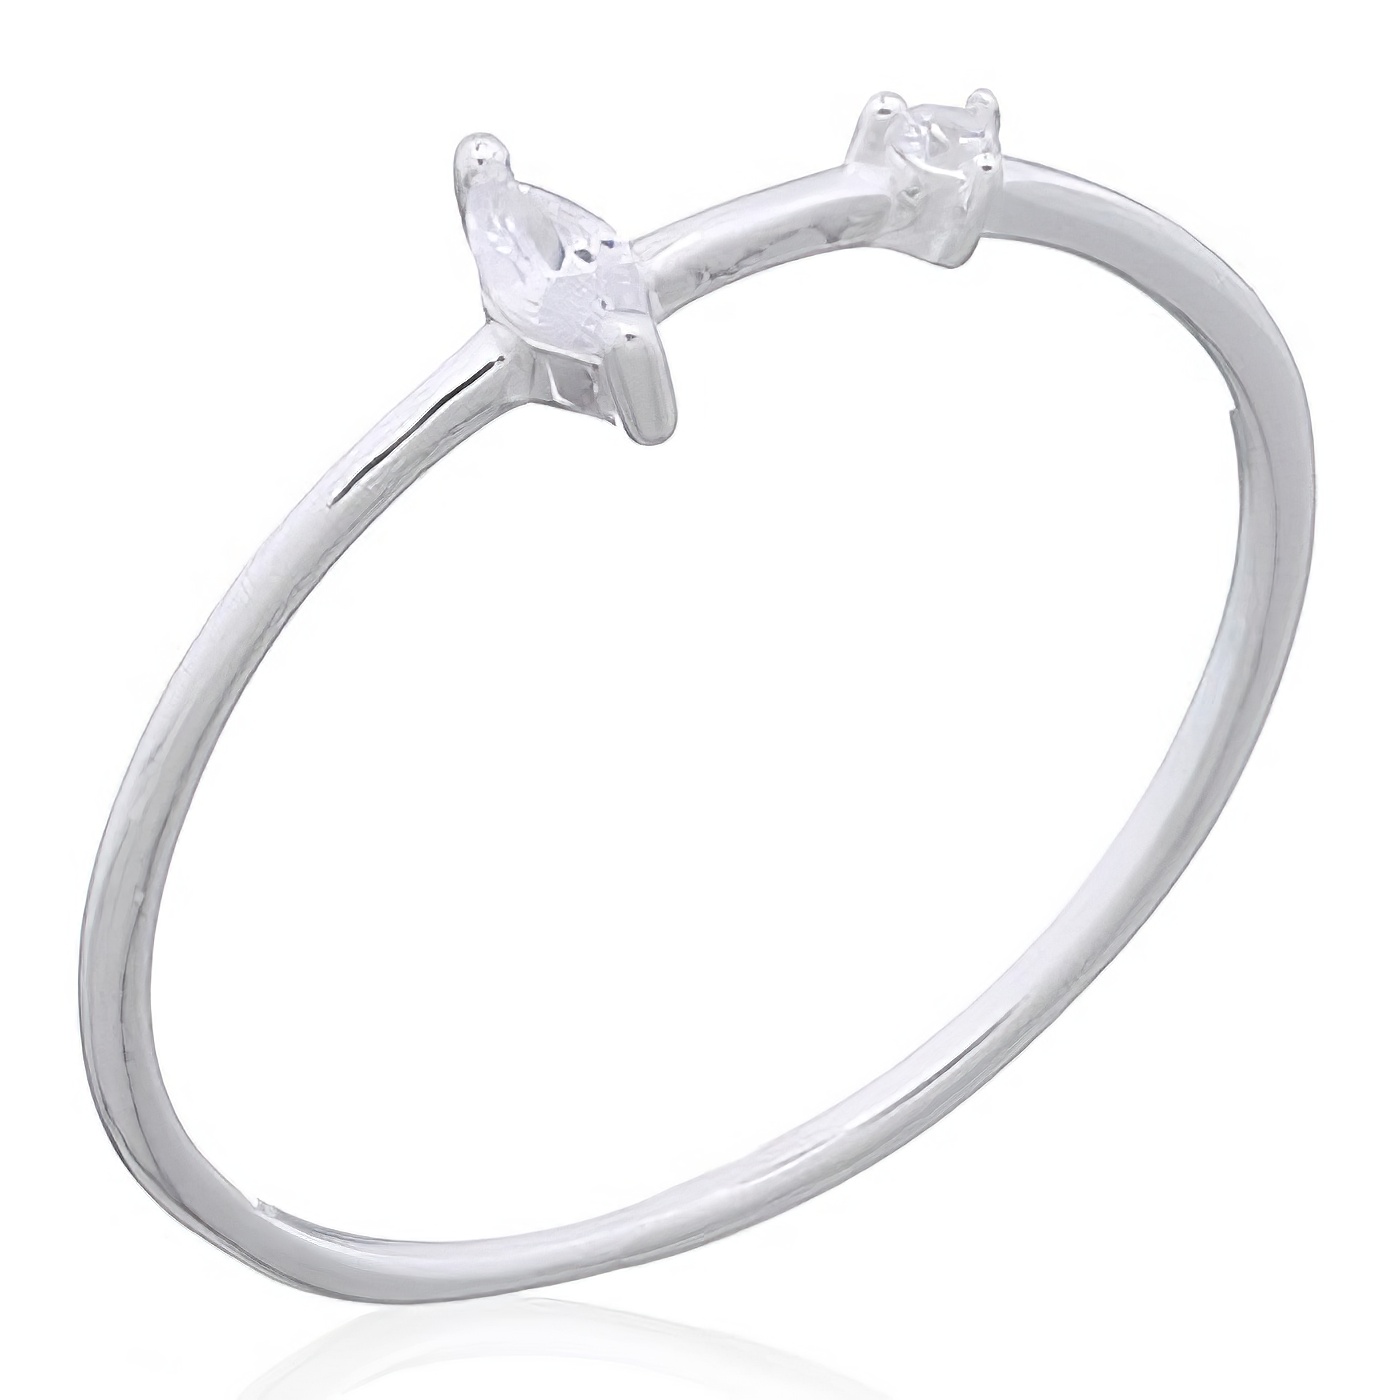 Simply Stunning Cubic Zirconia 925 Silver Ring by BeYindi 